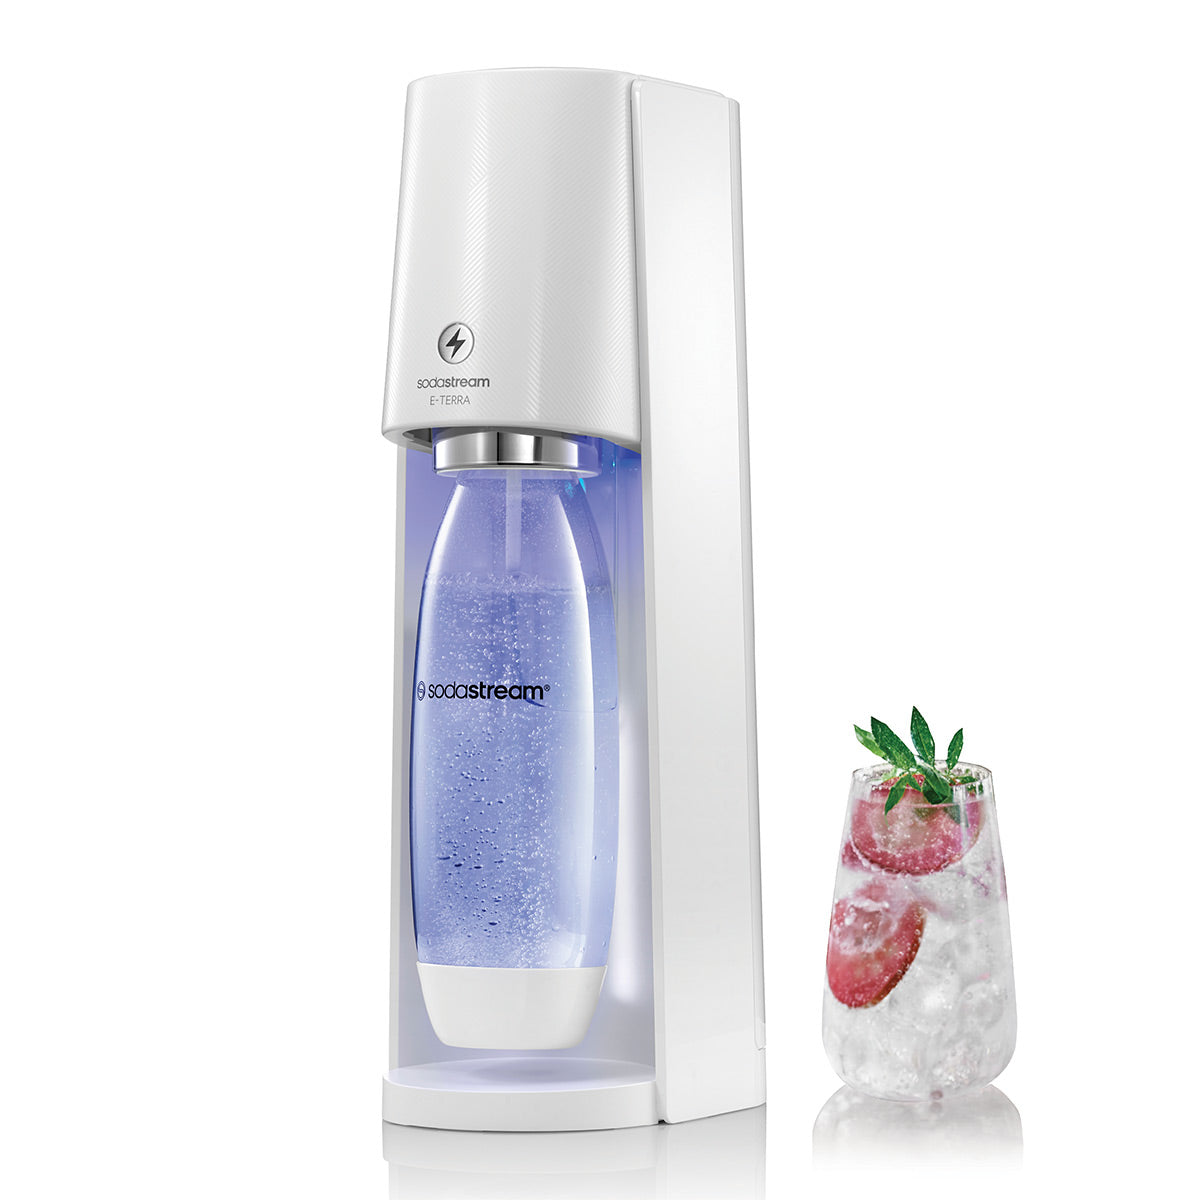 SodaStream E-Terra Sparkling Water Maker with Dishwasher Safe Bottle and Quick Connect CO2 Cylinder (White)